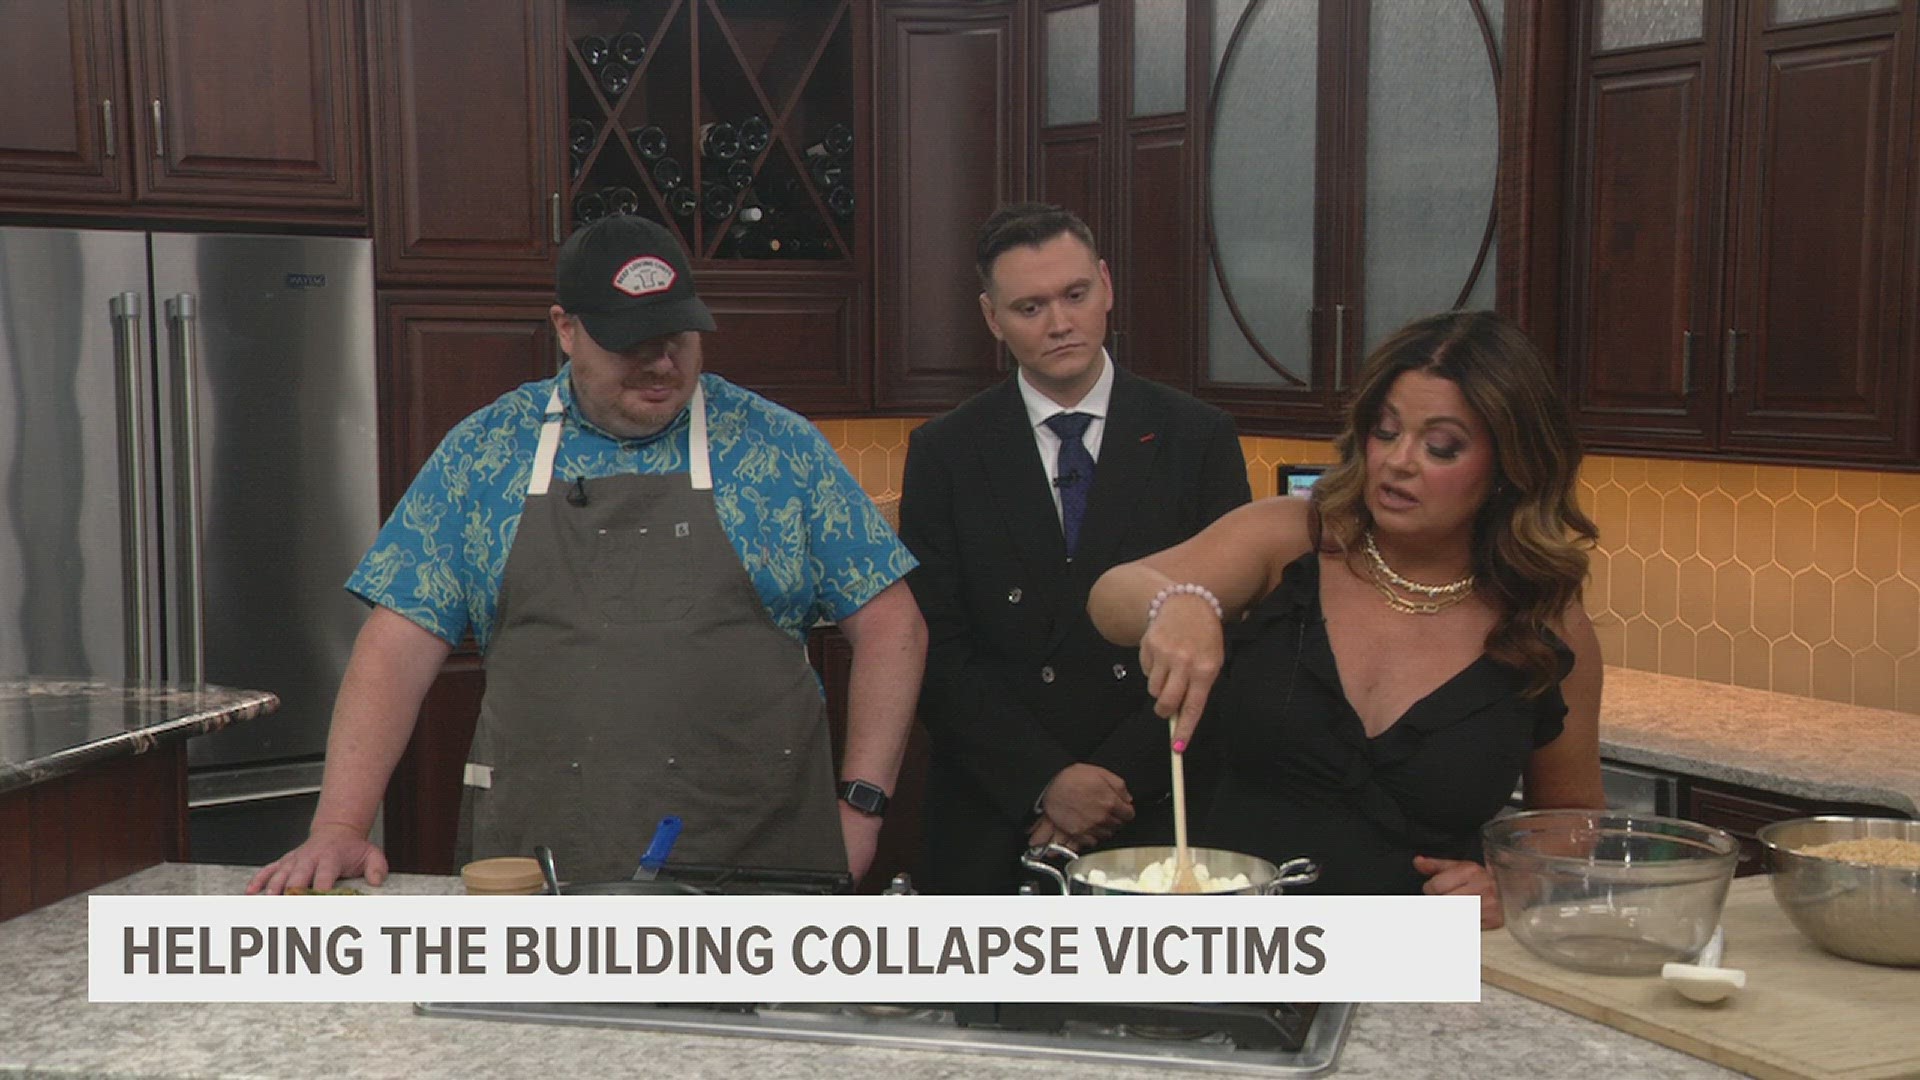 Tiphanie Cannon and Aaron McMahon of 'Oh So Sweet' will host a family-style dinner benefitting collapse victims on Sunday at 5 p.m.